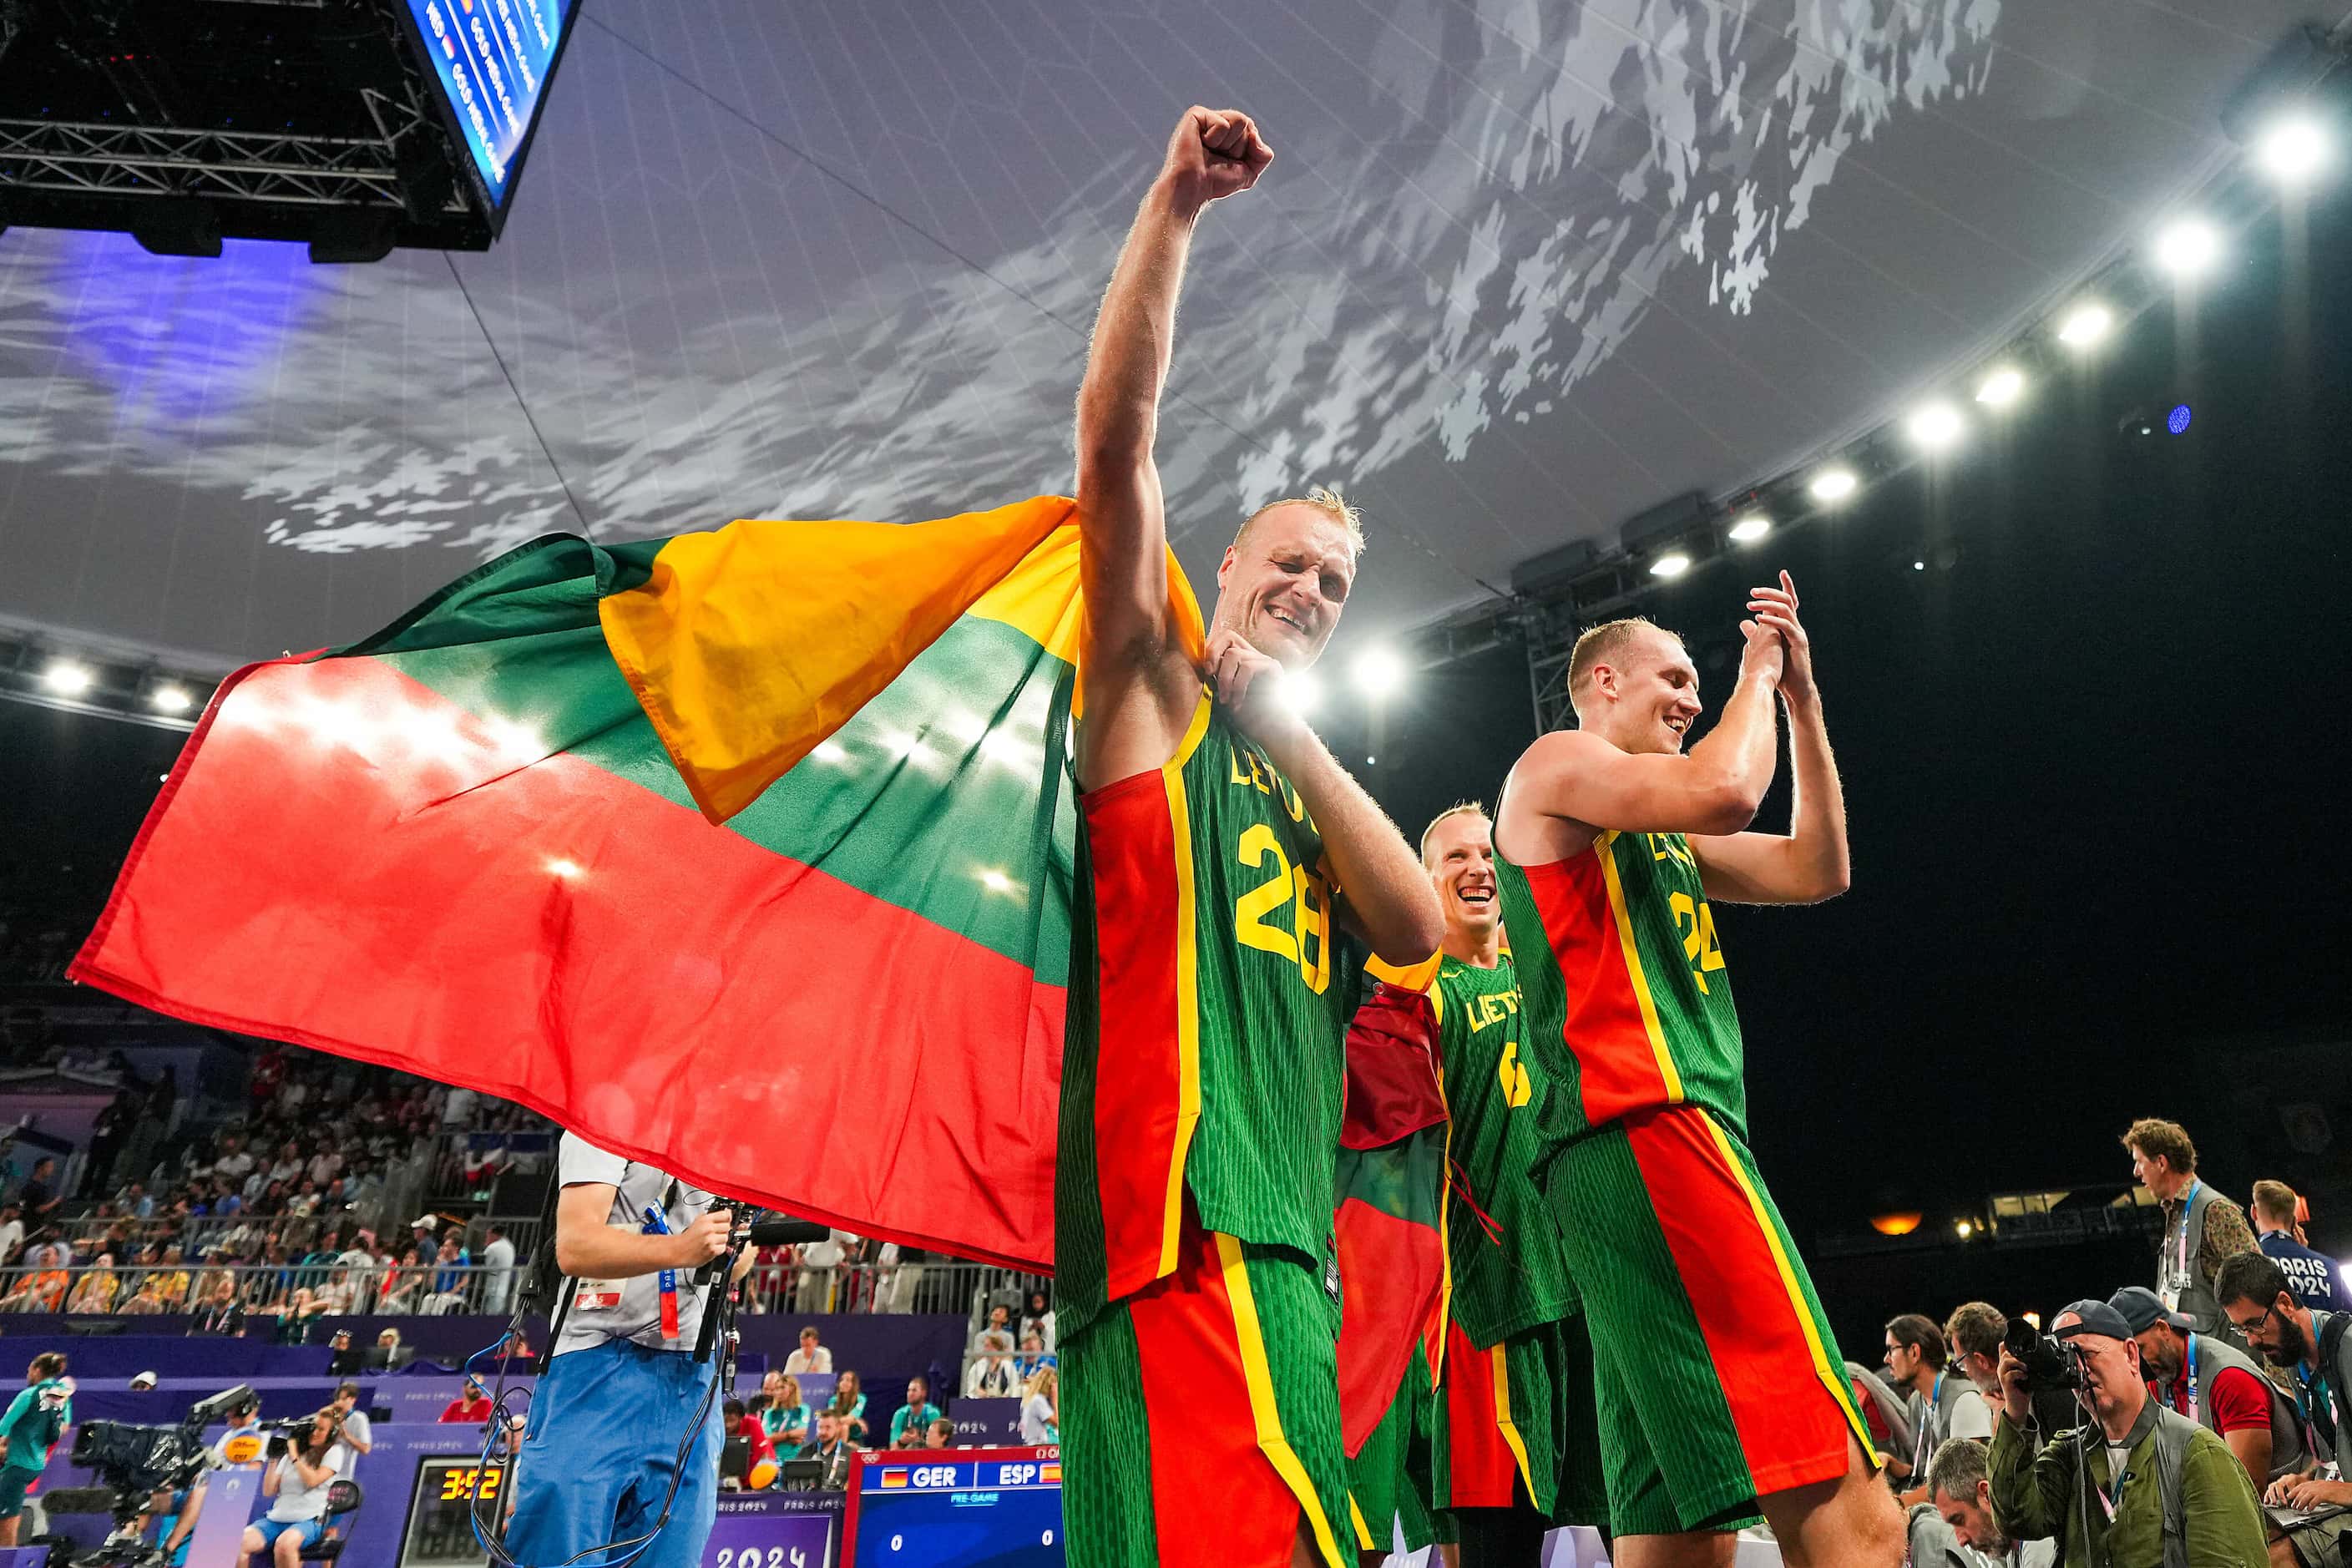 Lithuania’s Evaldas Dziaugys (26) celebrates after a victory in the men’s 3x3 basketball...